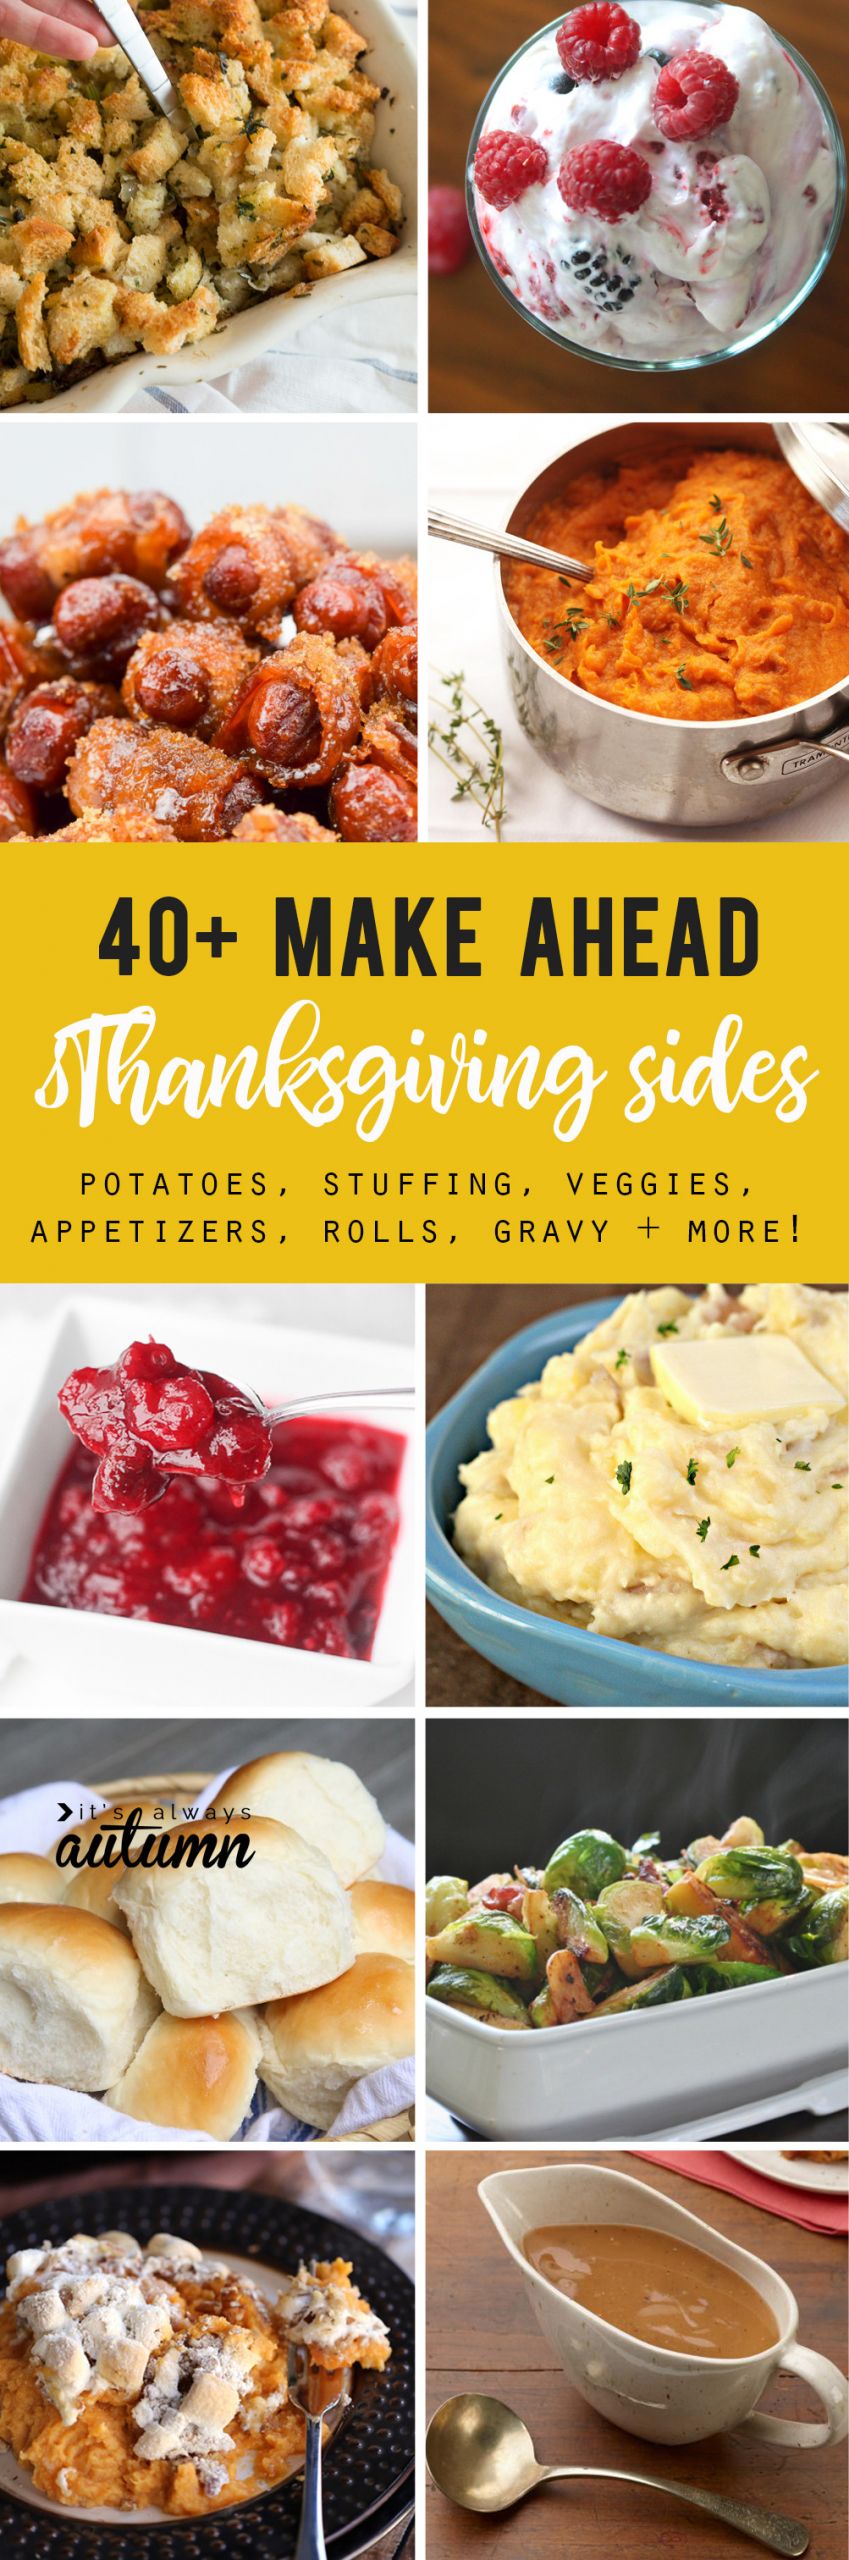 Thanksgiving Side Dishes List
 the BEST LIST of Thanksgiving side dishes you can make